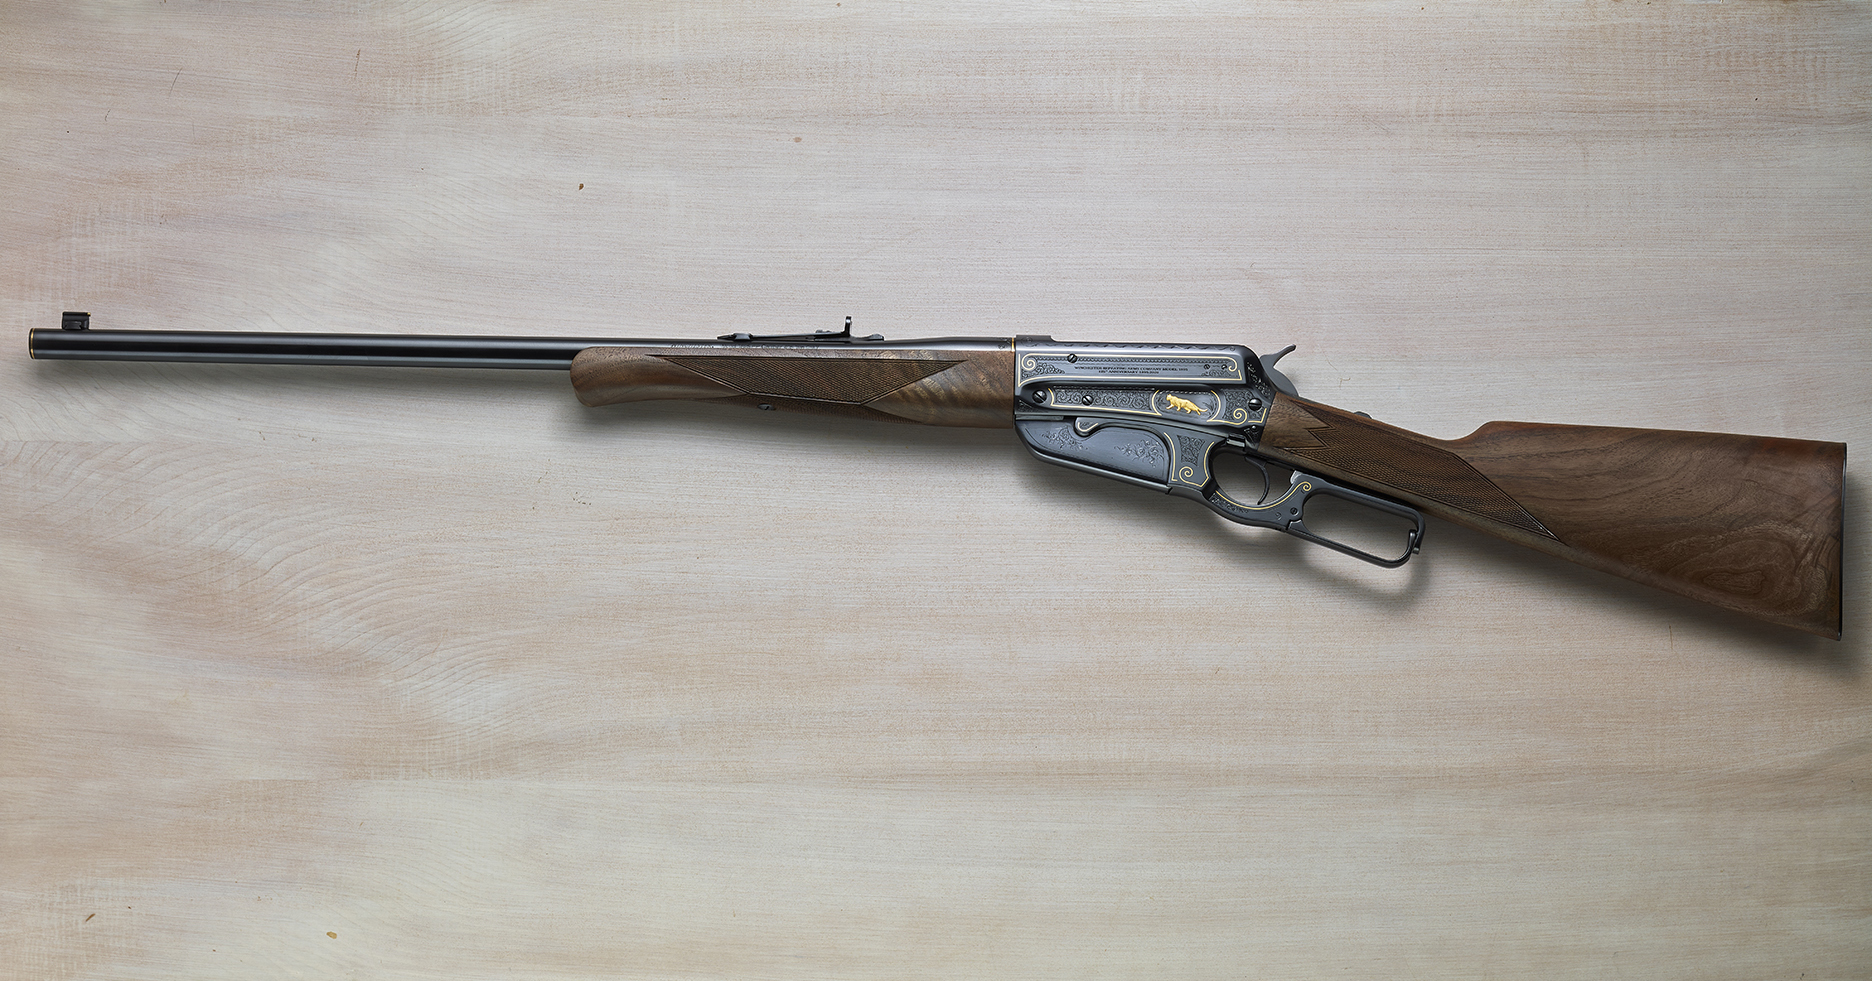 One-of-a-Kind 125th Anniversary Winchester Available at Auction to Benefit the Cody Firearms Museum